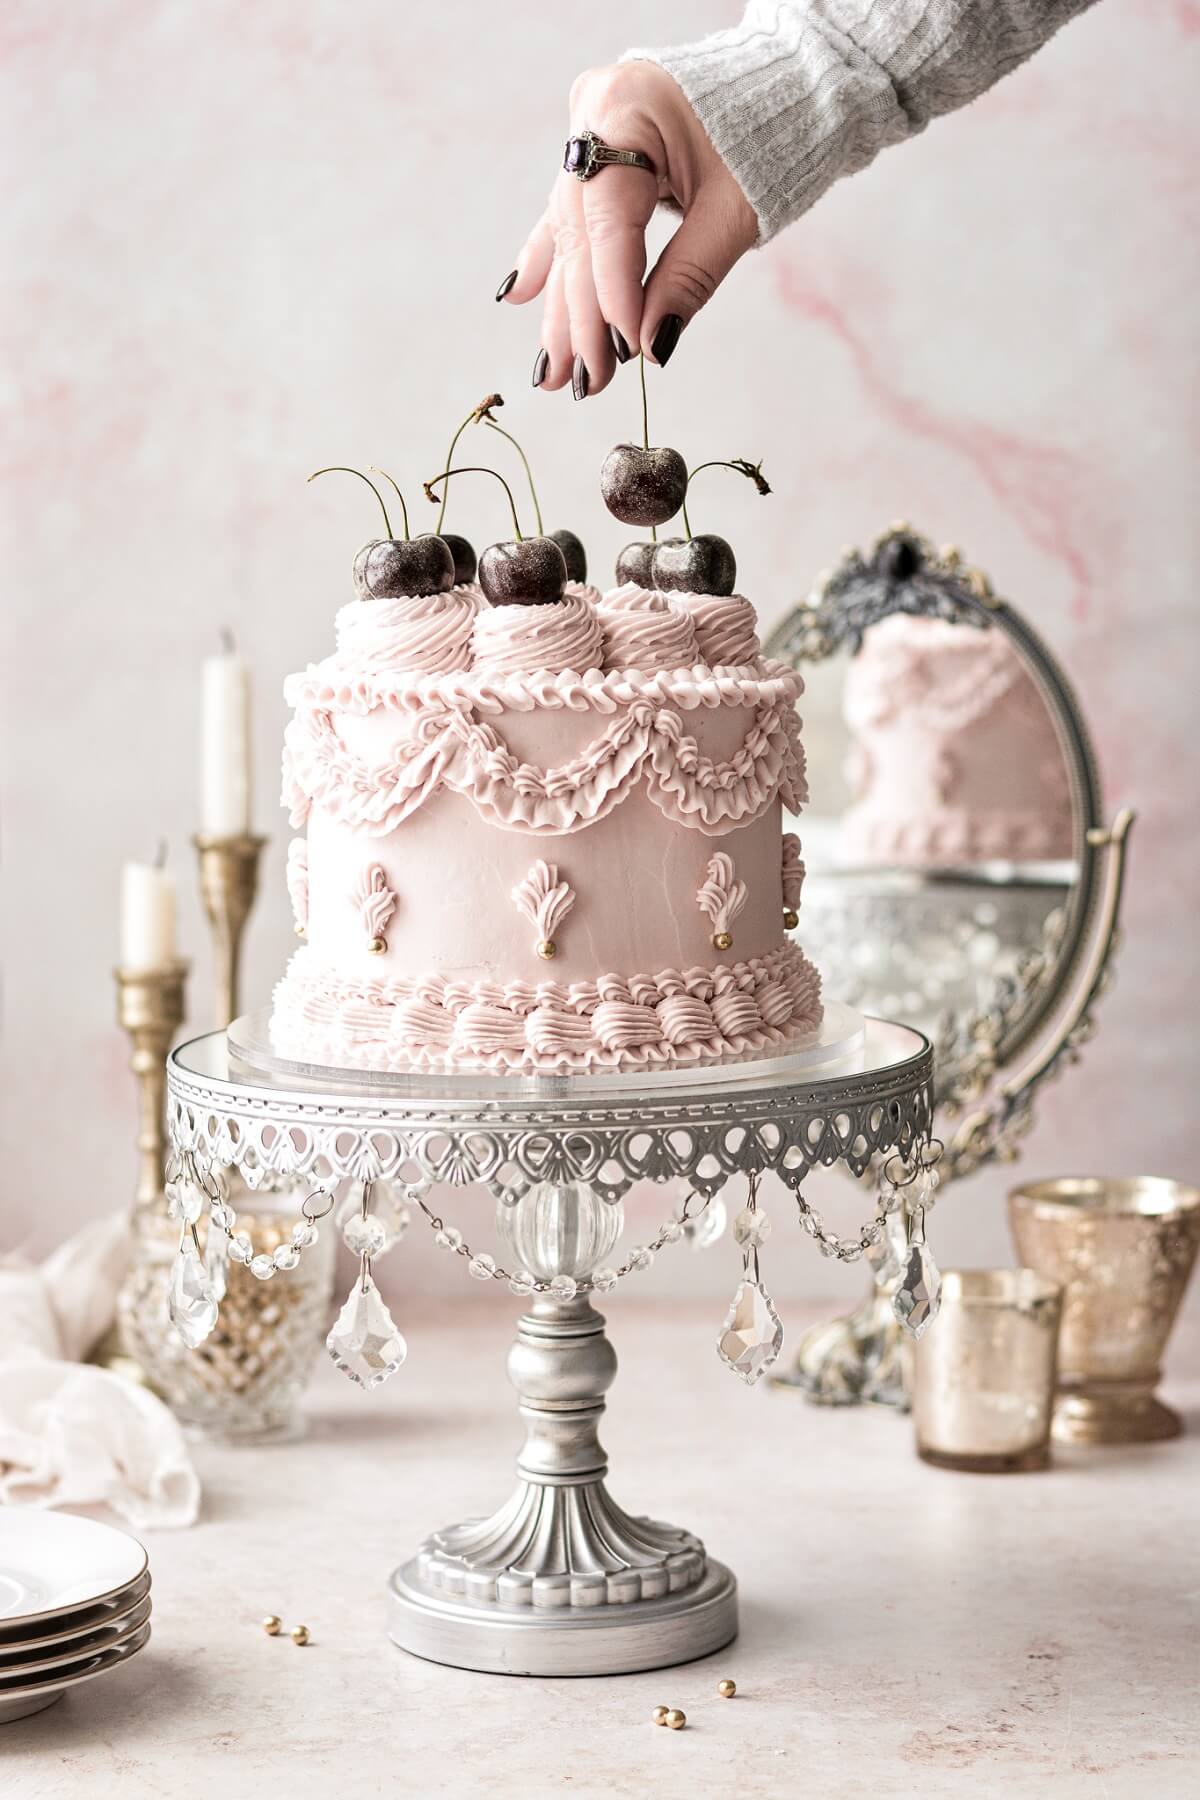 Cherries being placed on top of a pink lambeth cake.